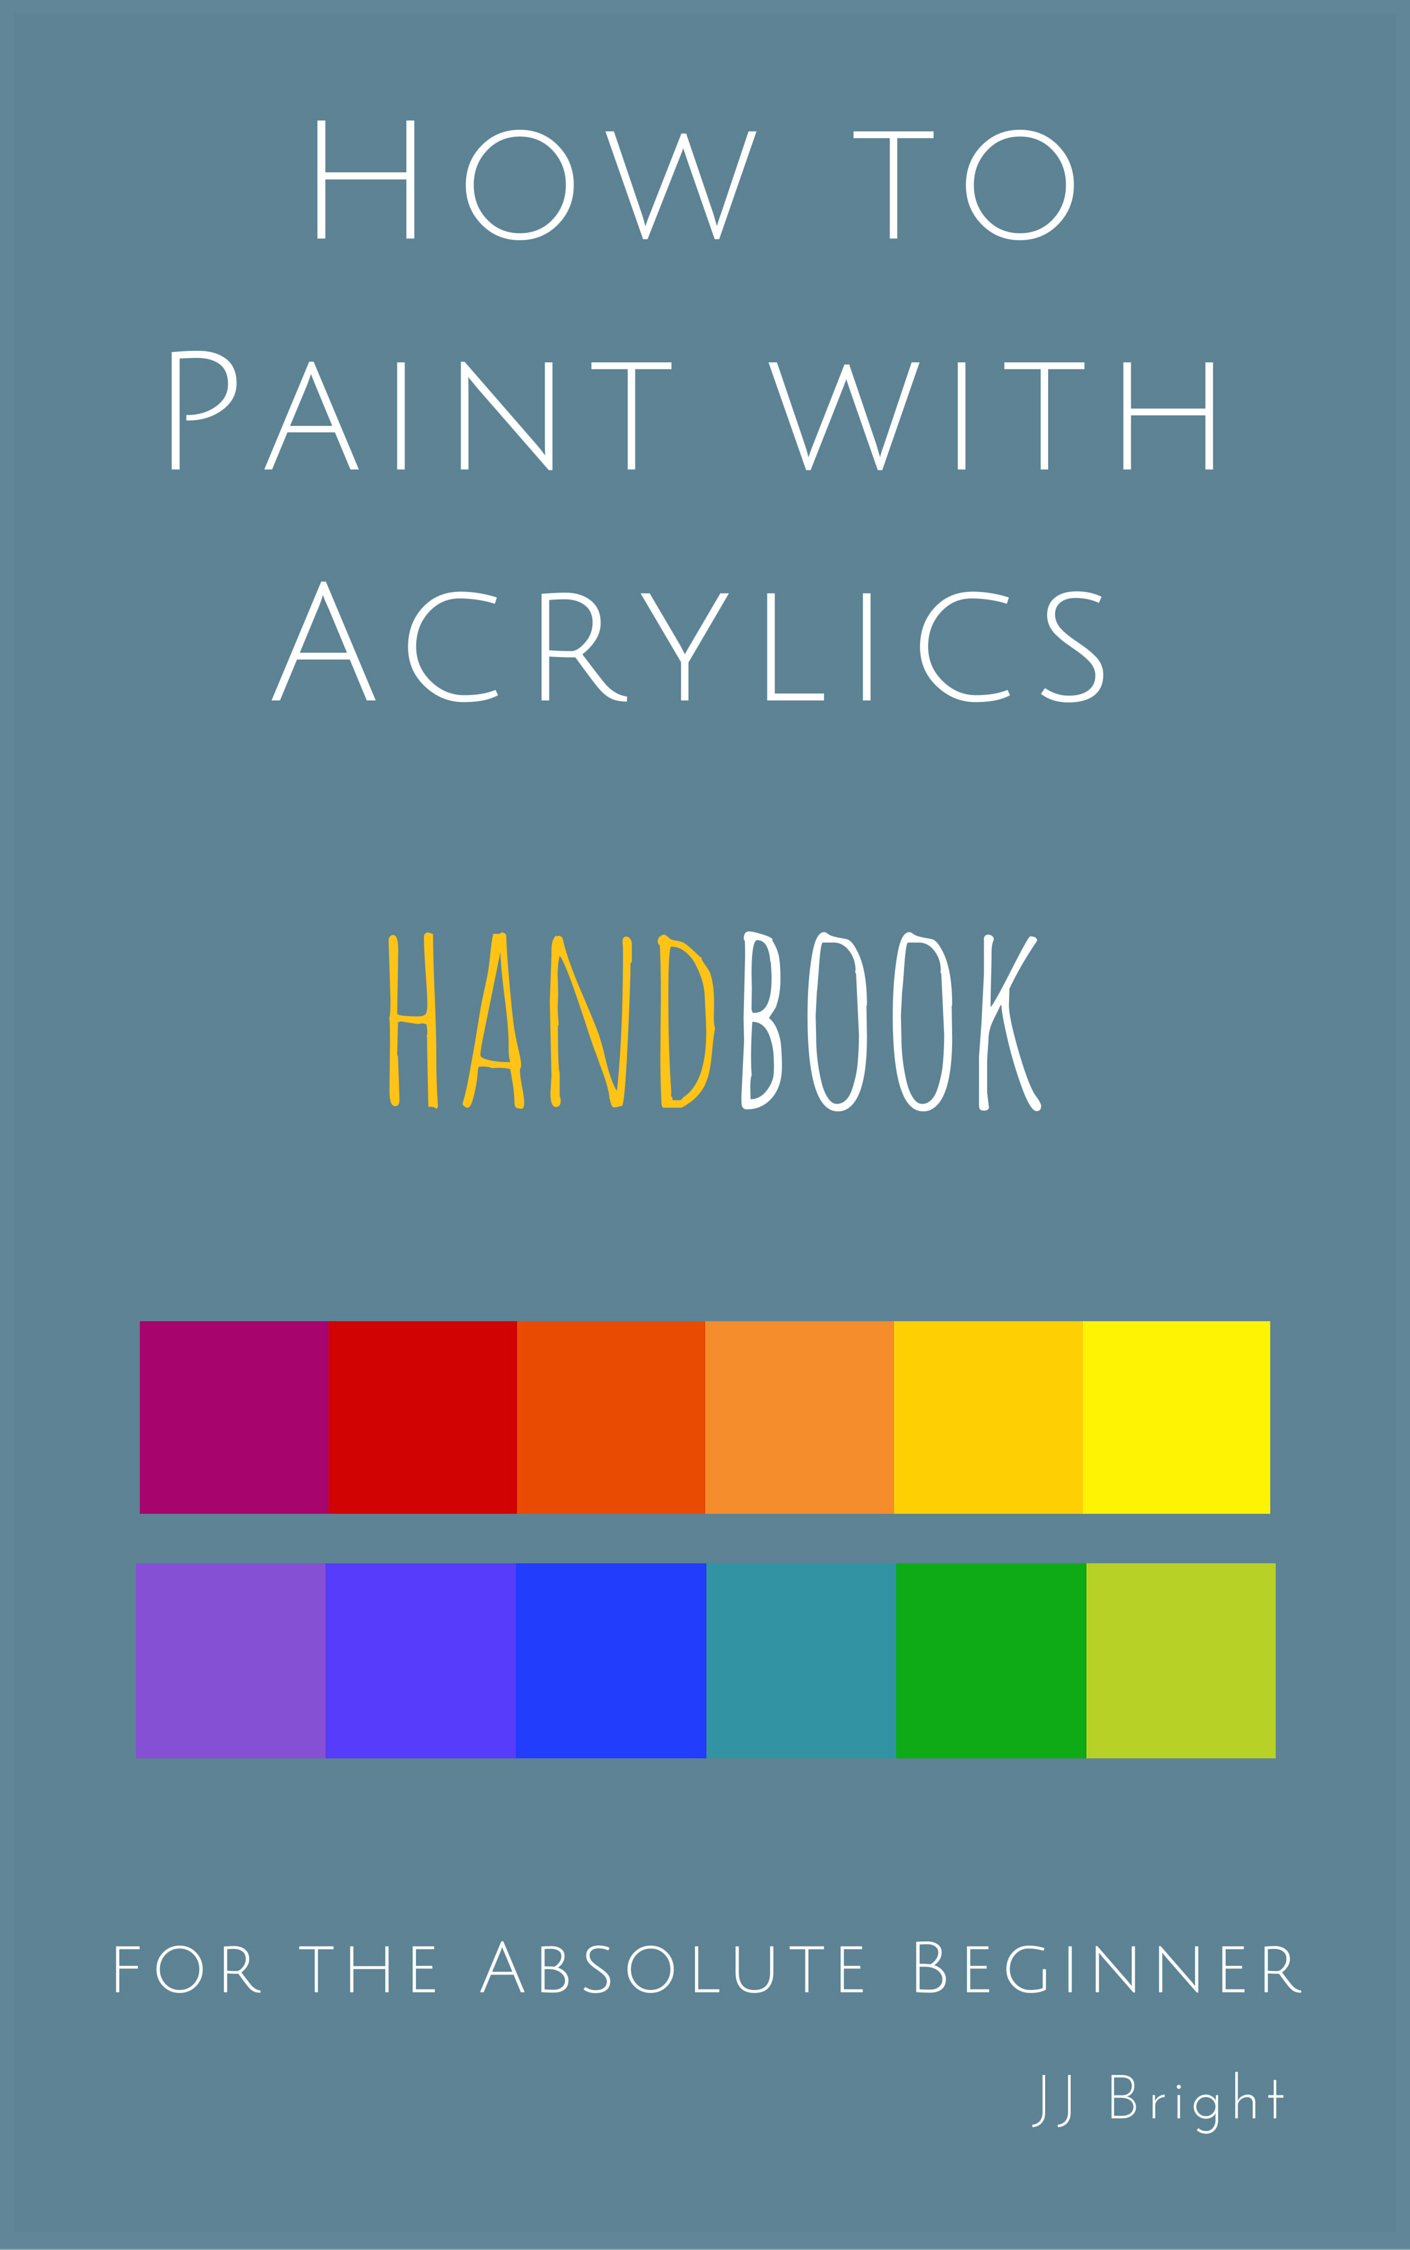 How to Paint with Acrylics HANDBOOK for the Absolute Beginner